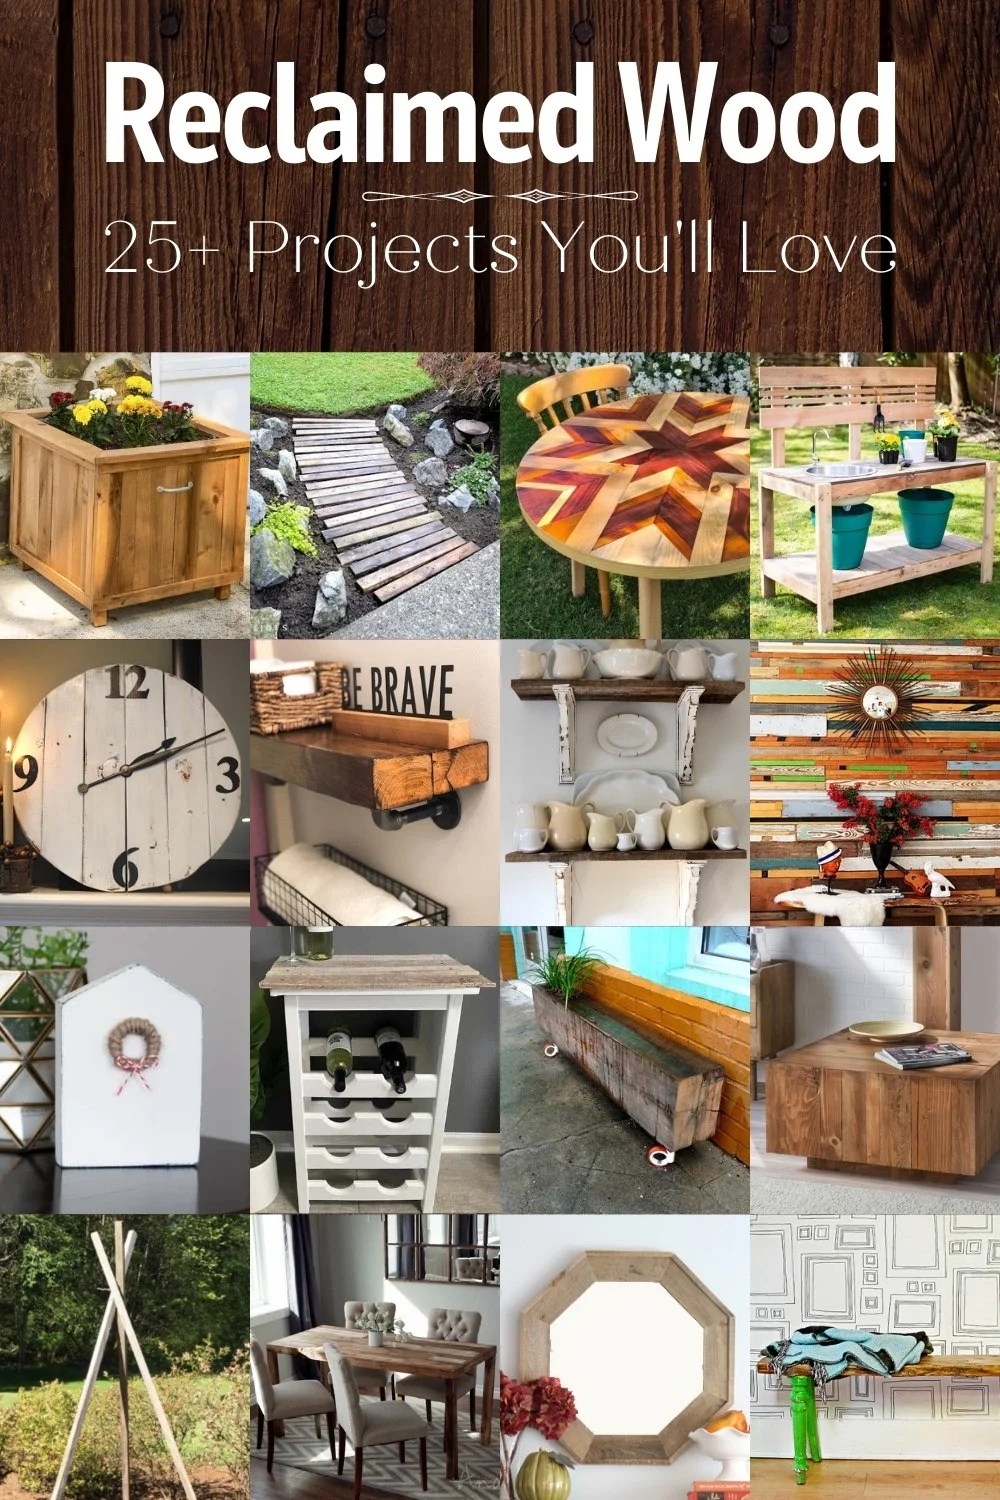 scrape wood projects, wood crafts ideas, upcycle, crafts